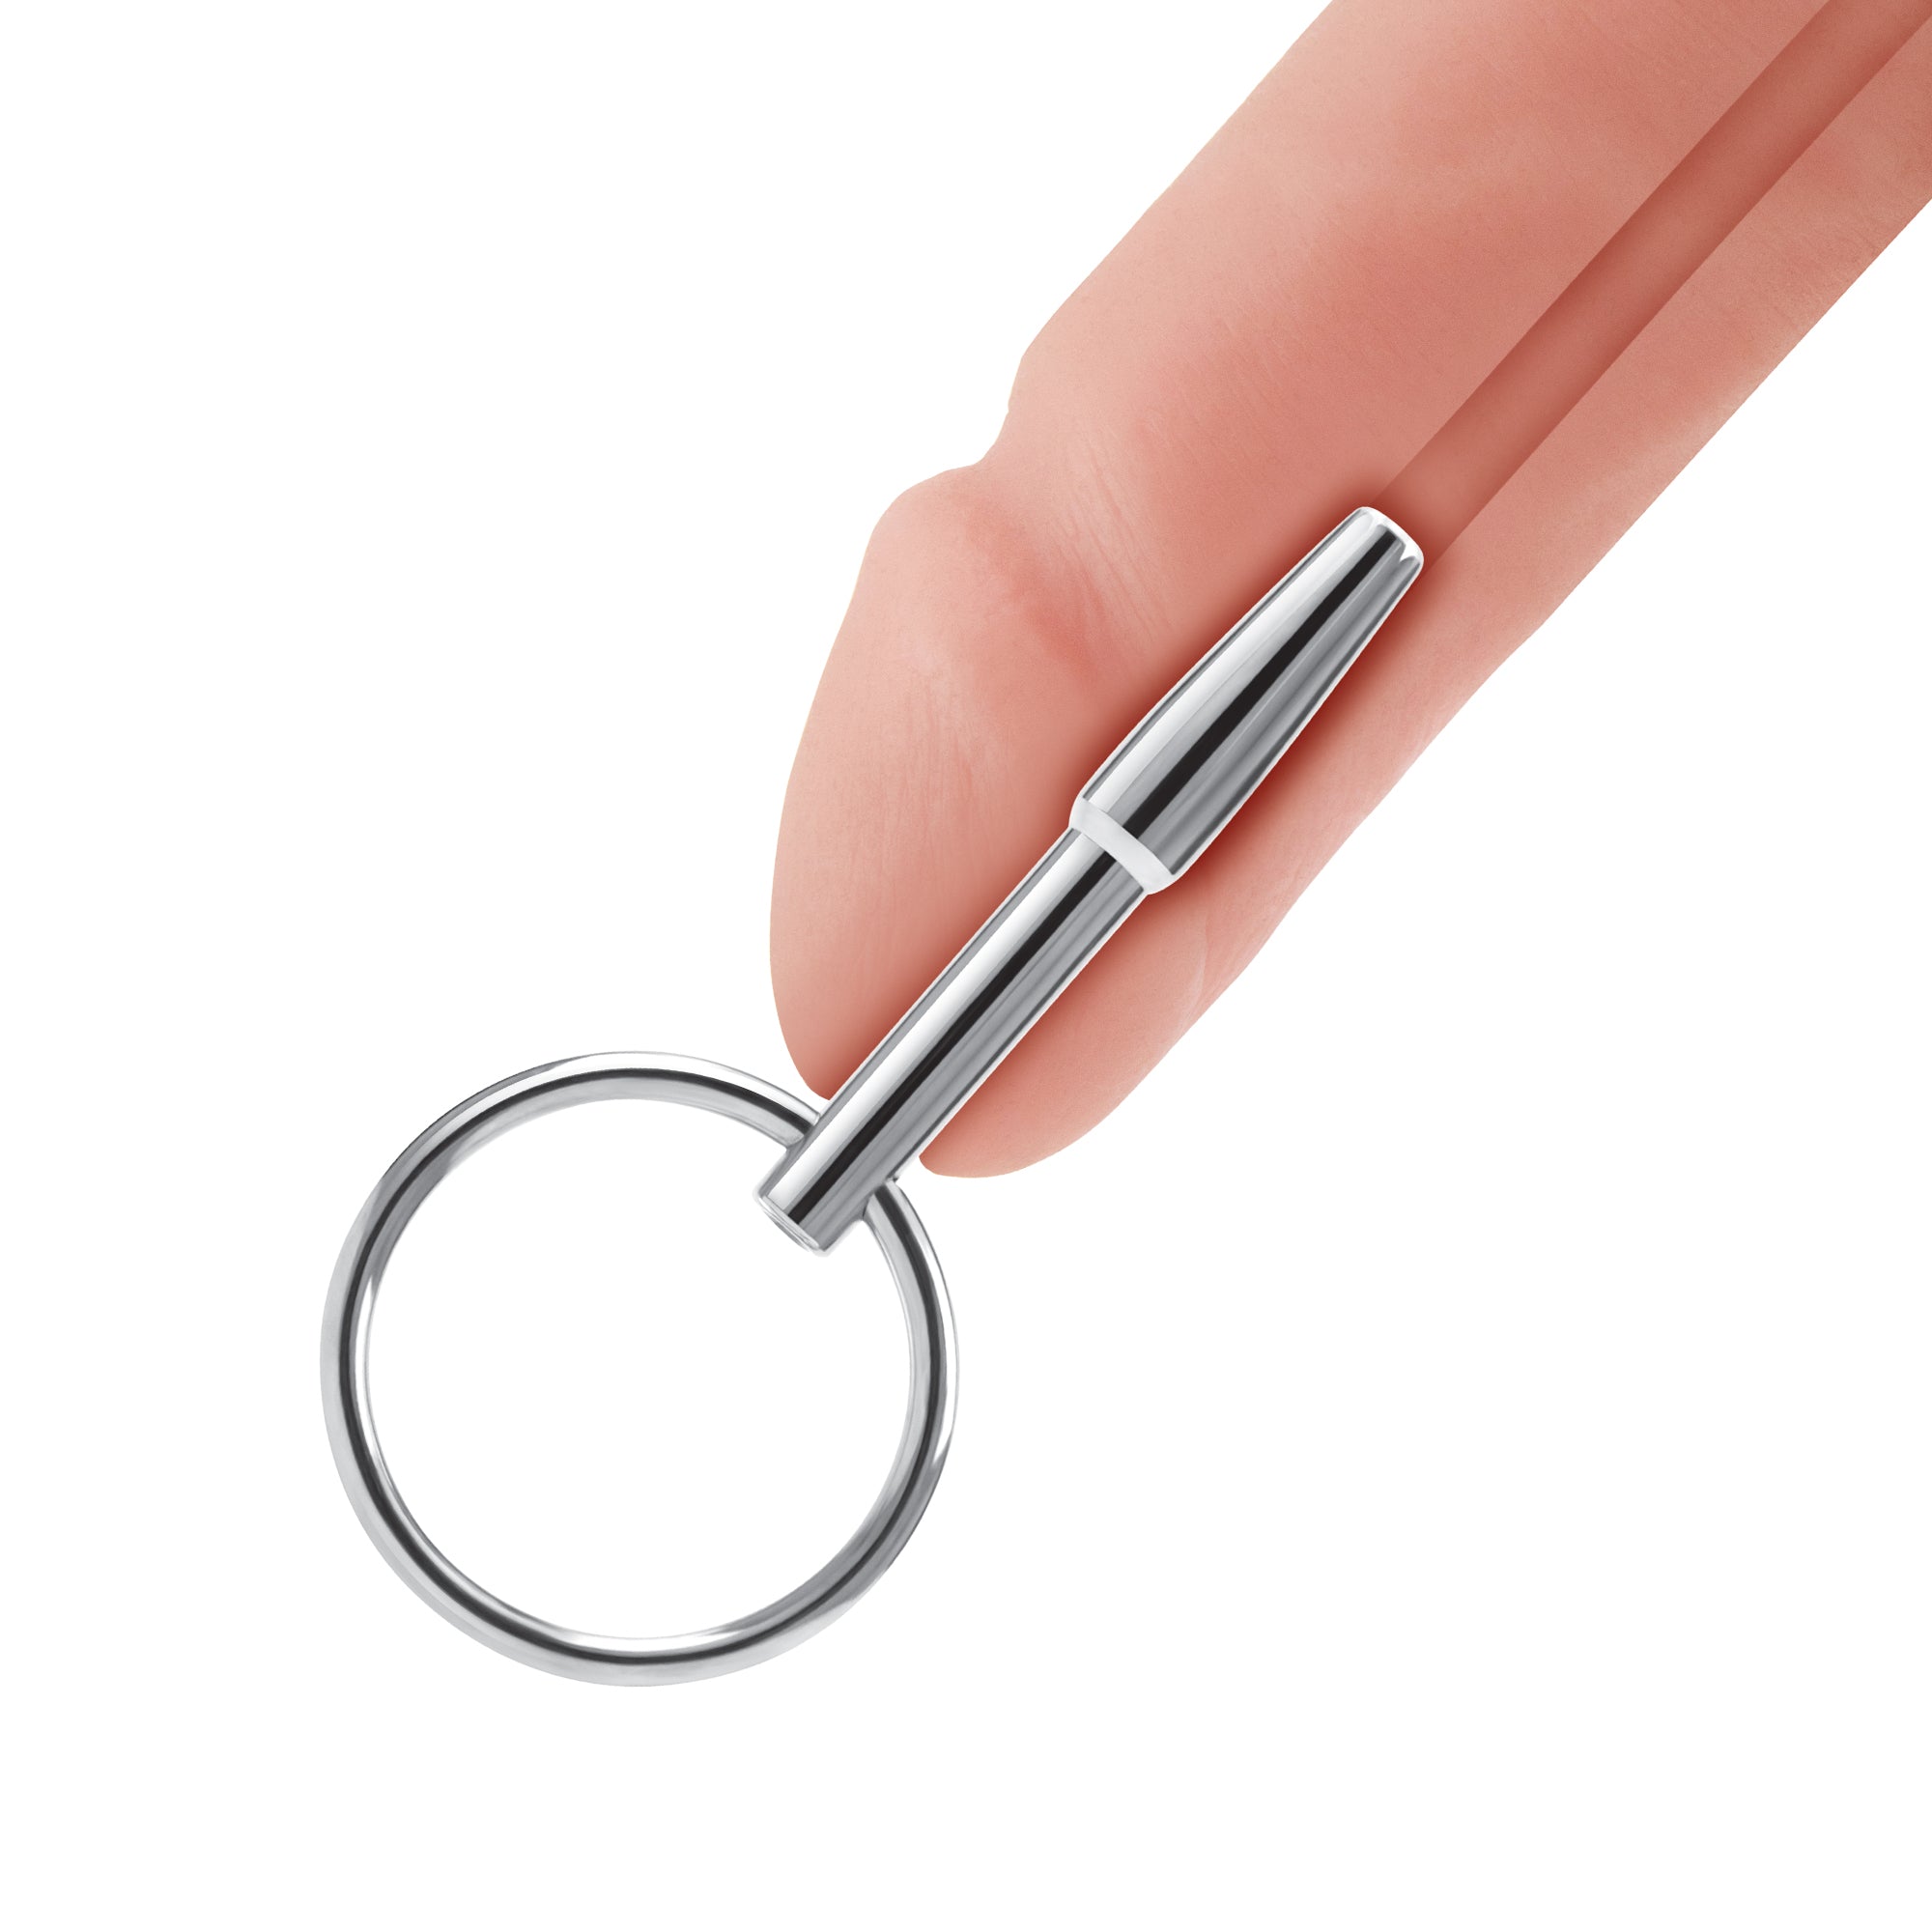 Stainless Steel Penis Plug with Ring